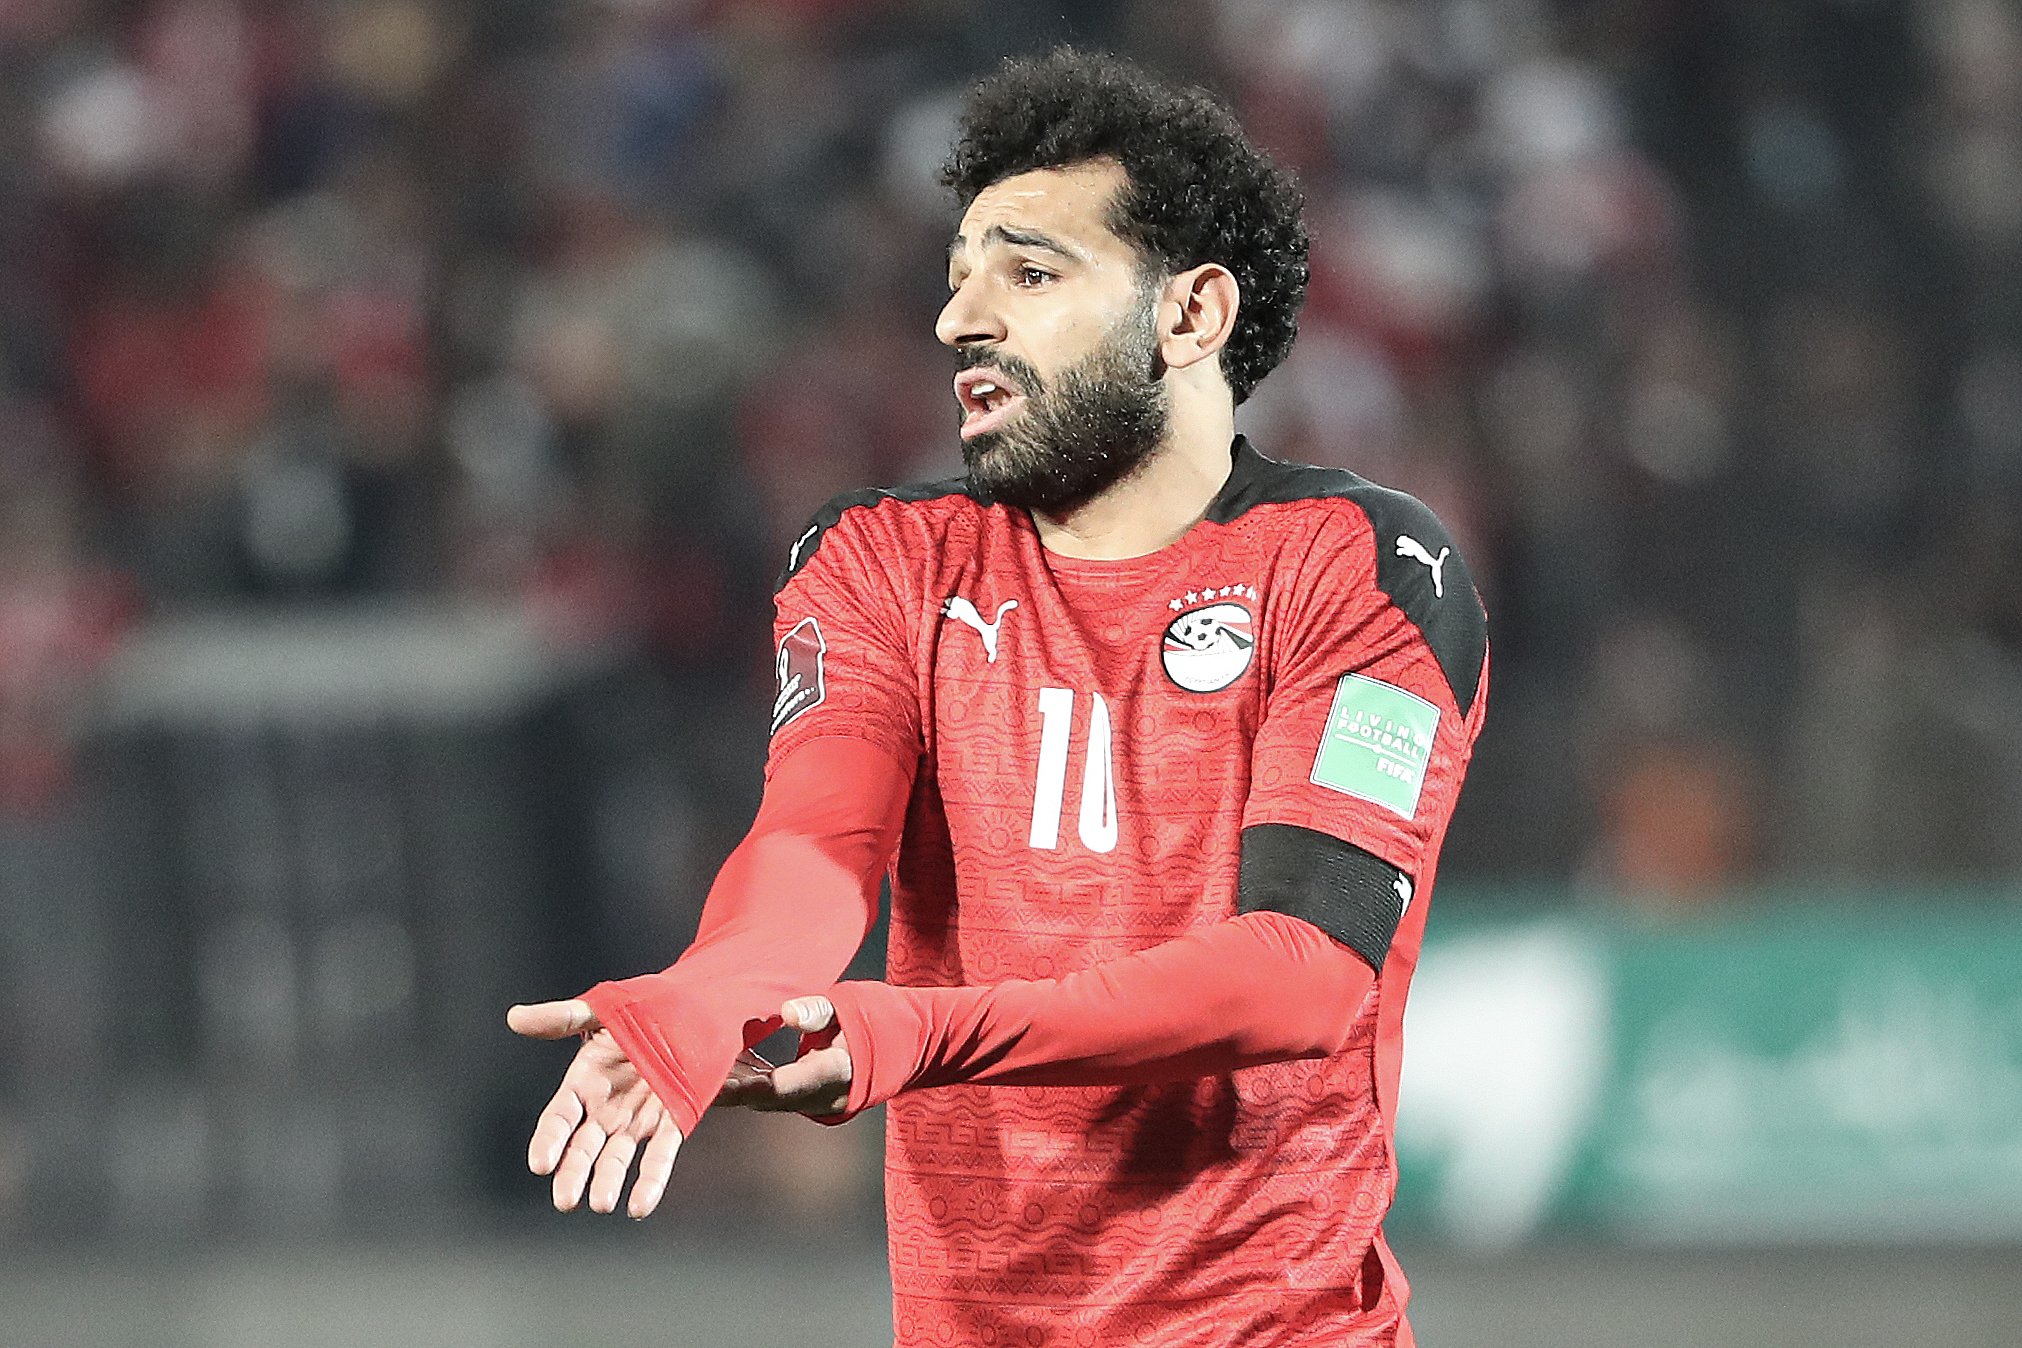 Senegal beat Egypt: Senegal win on penalties to qualify for the World Cup 2022 in Qatar as Egypt are KNOCKED OUT after Captain Mohamed Salah missed his penalty kick